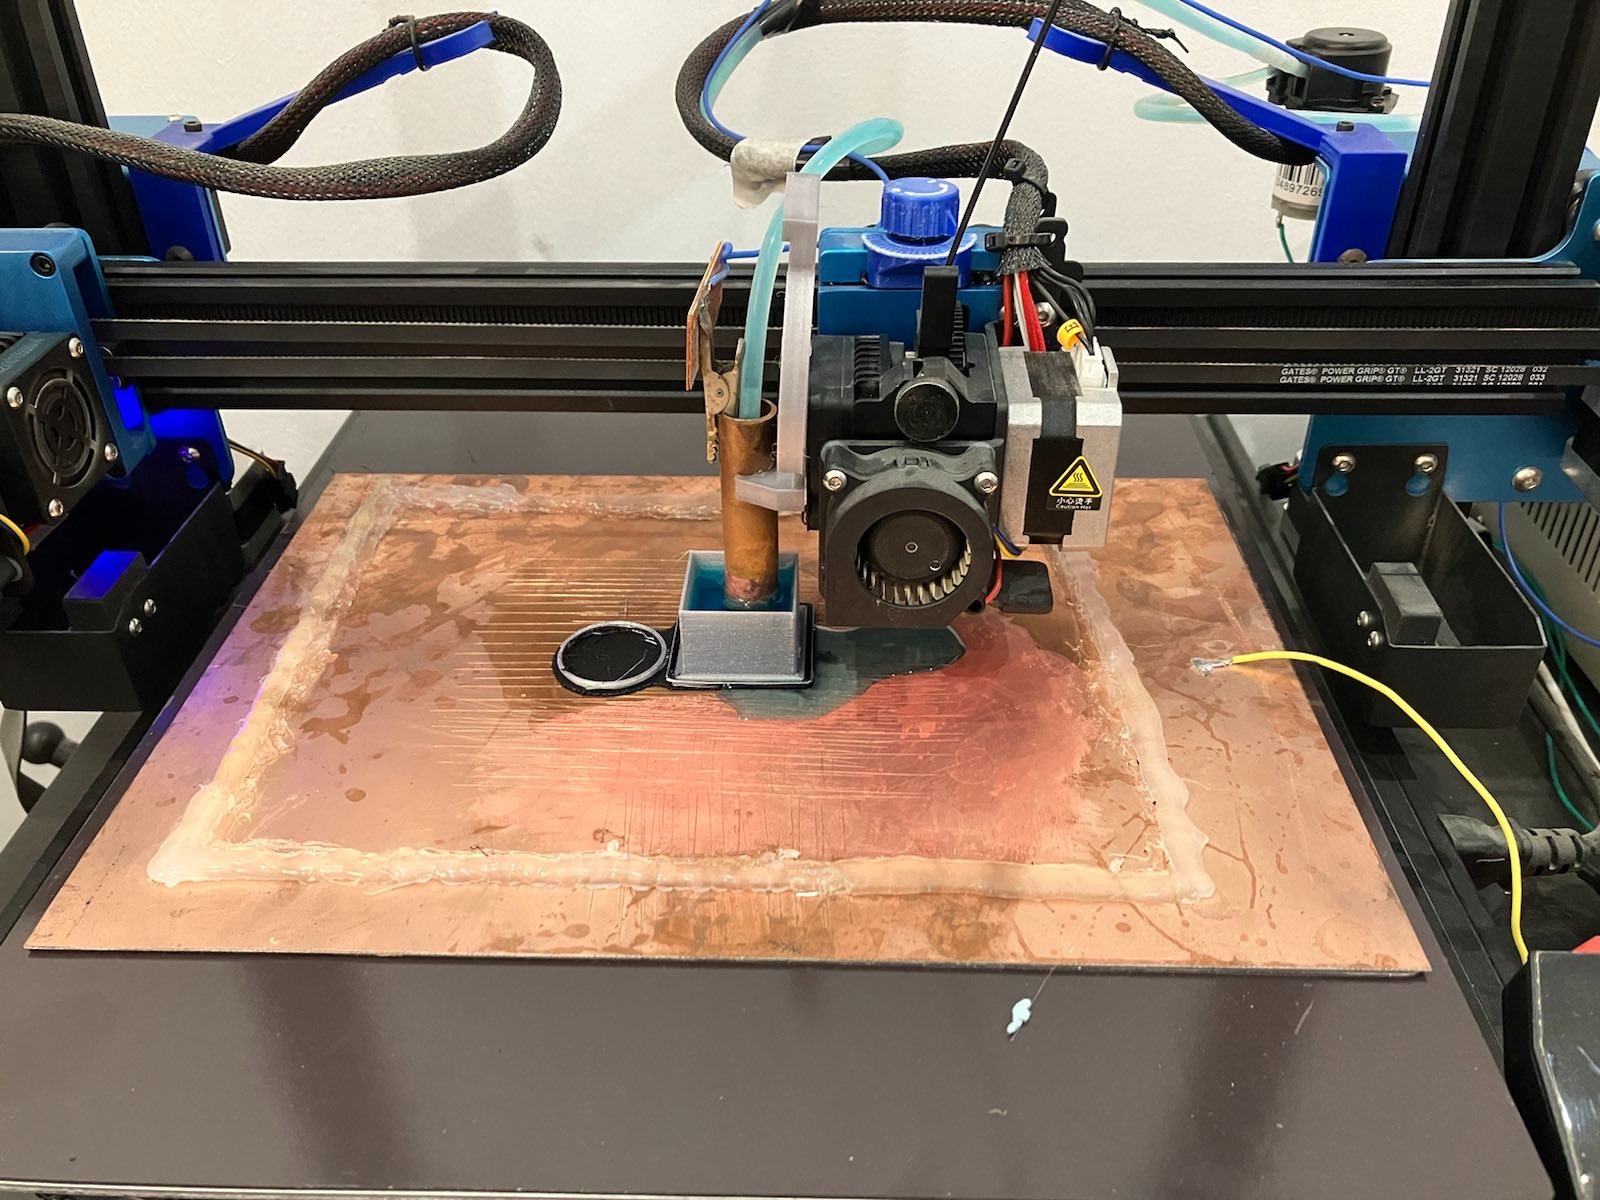 AutoPlater - A 3D printer add-on to automatically electroplate your prints